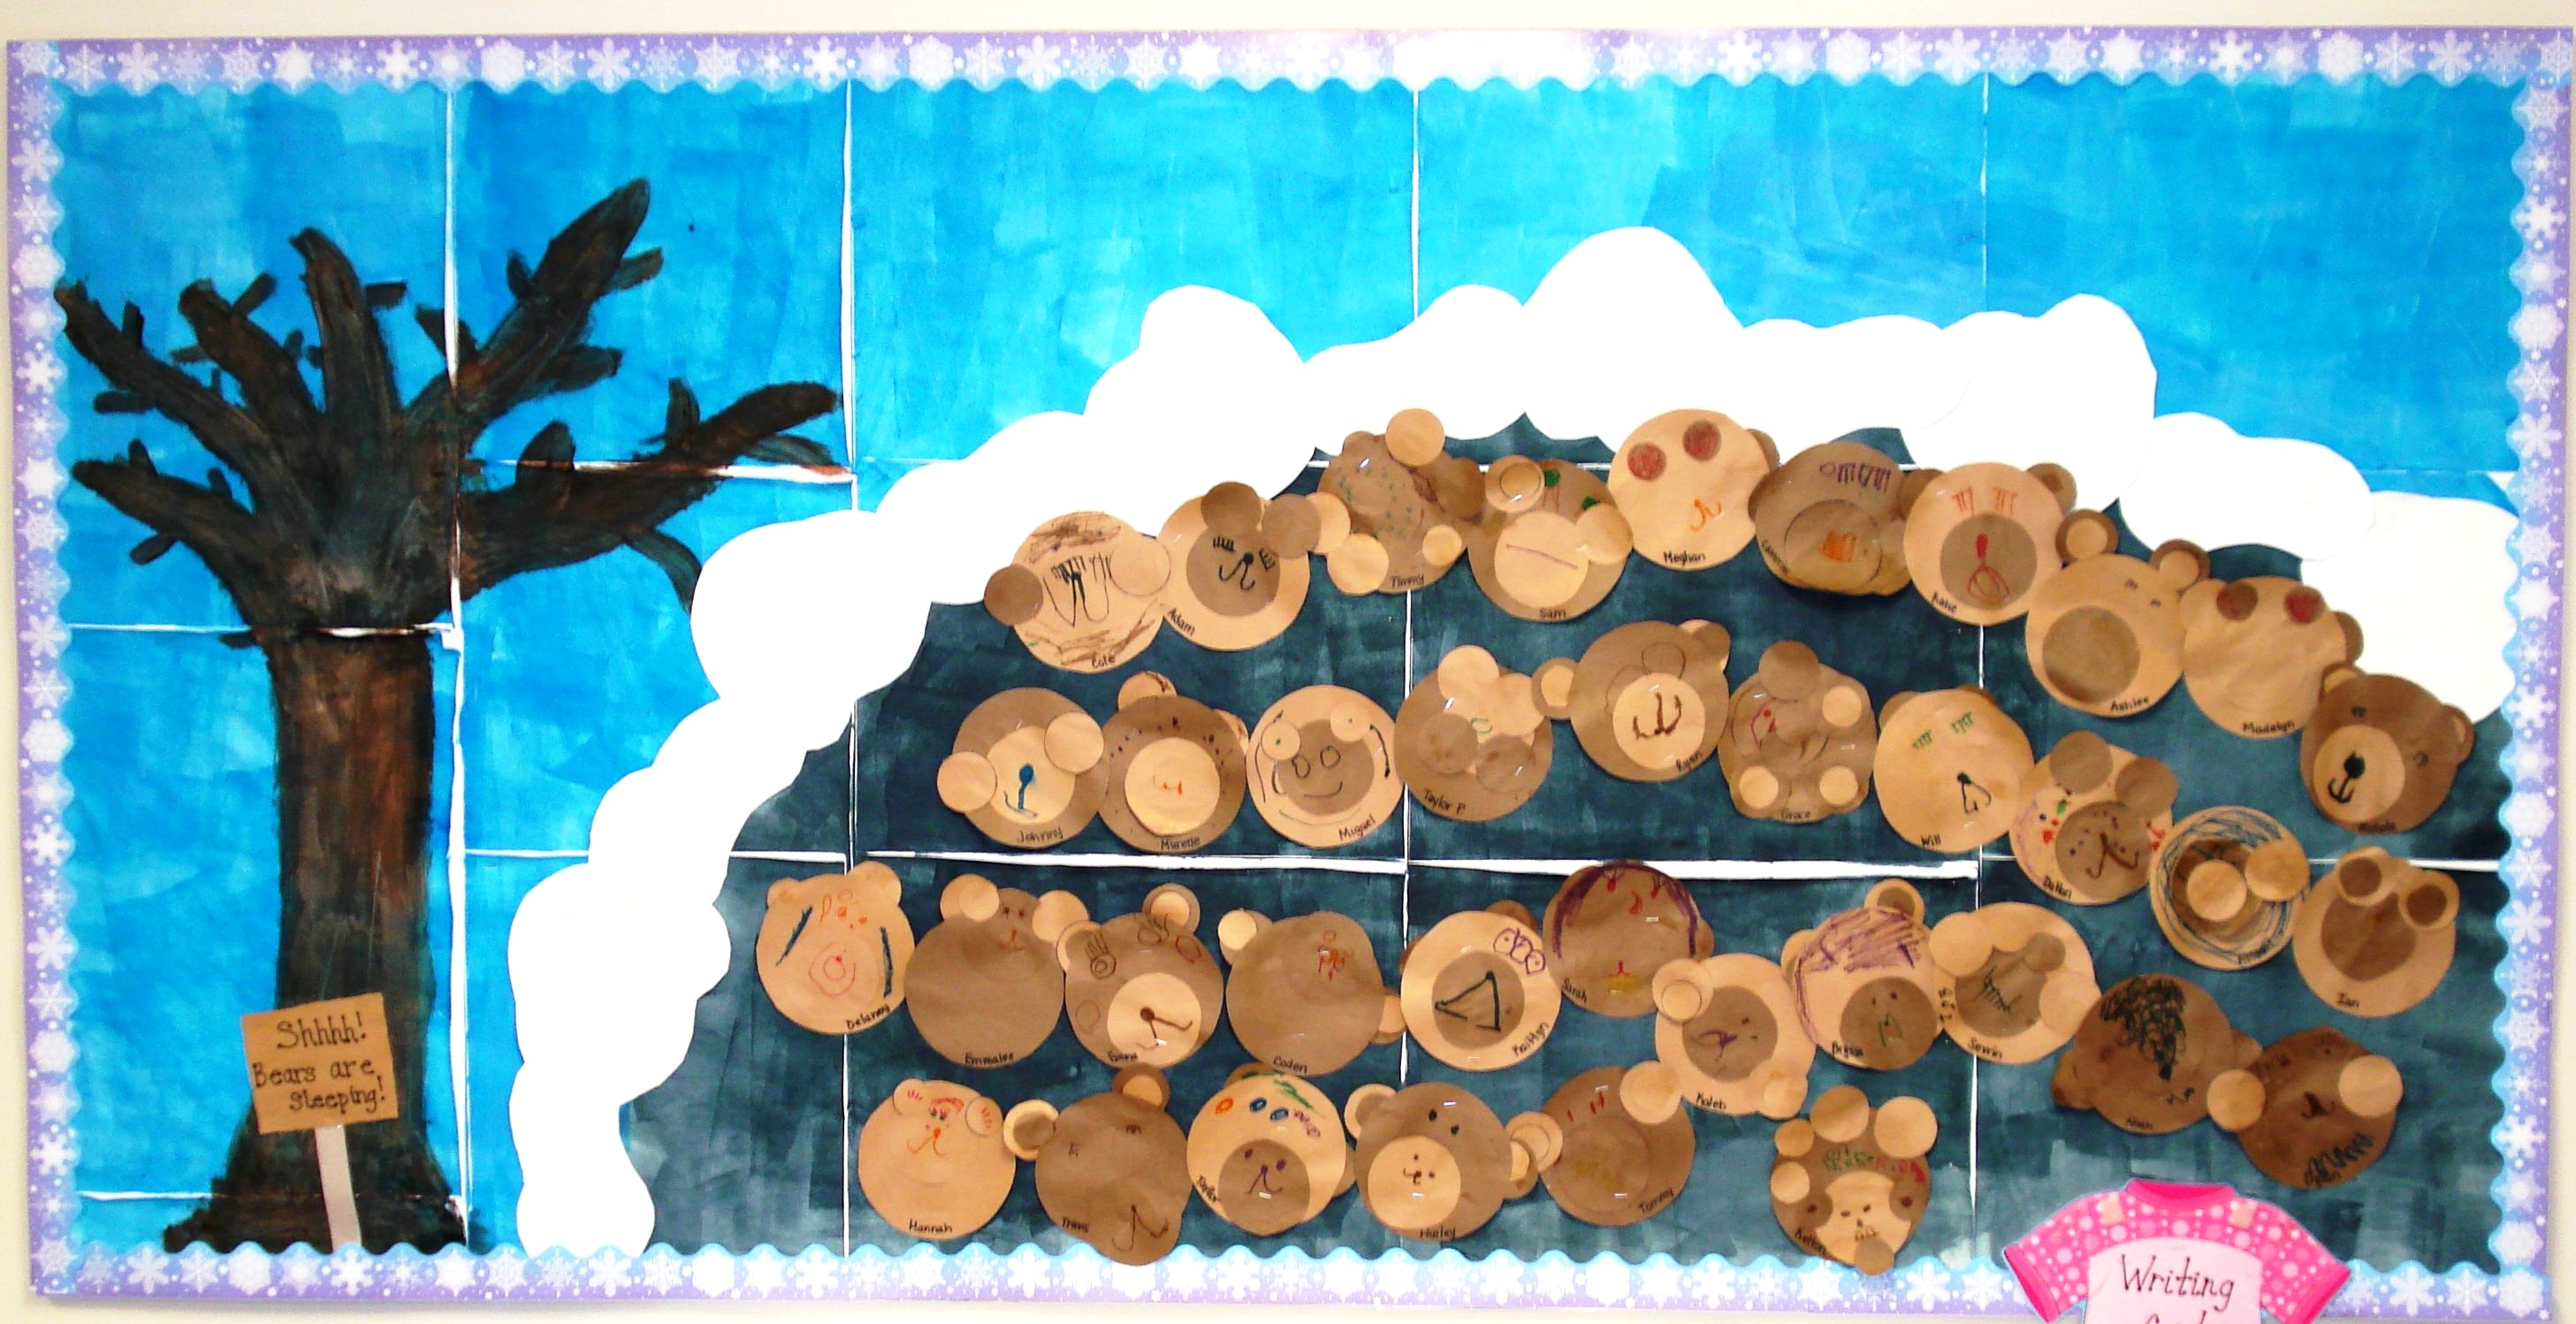 Winter bulletin board ideas for teachers! I have rounded up so fun winter-themed bulletin board ideas for your classroom! These would work great as December bulletin boards or January bulletin boards.